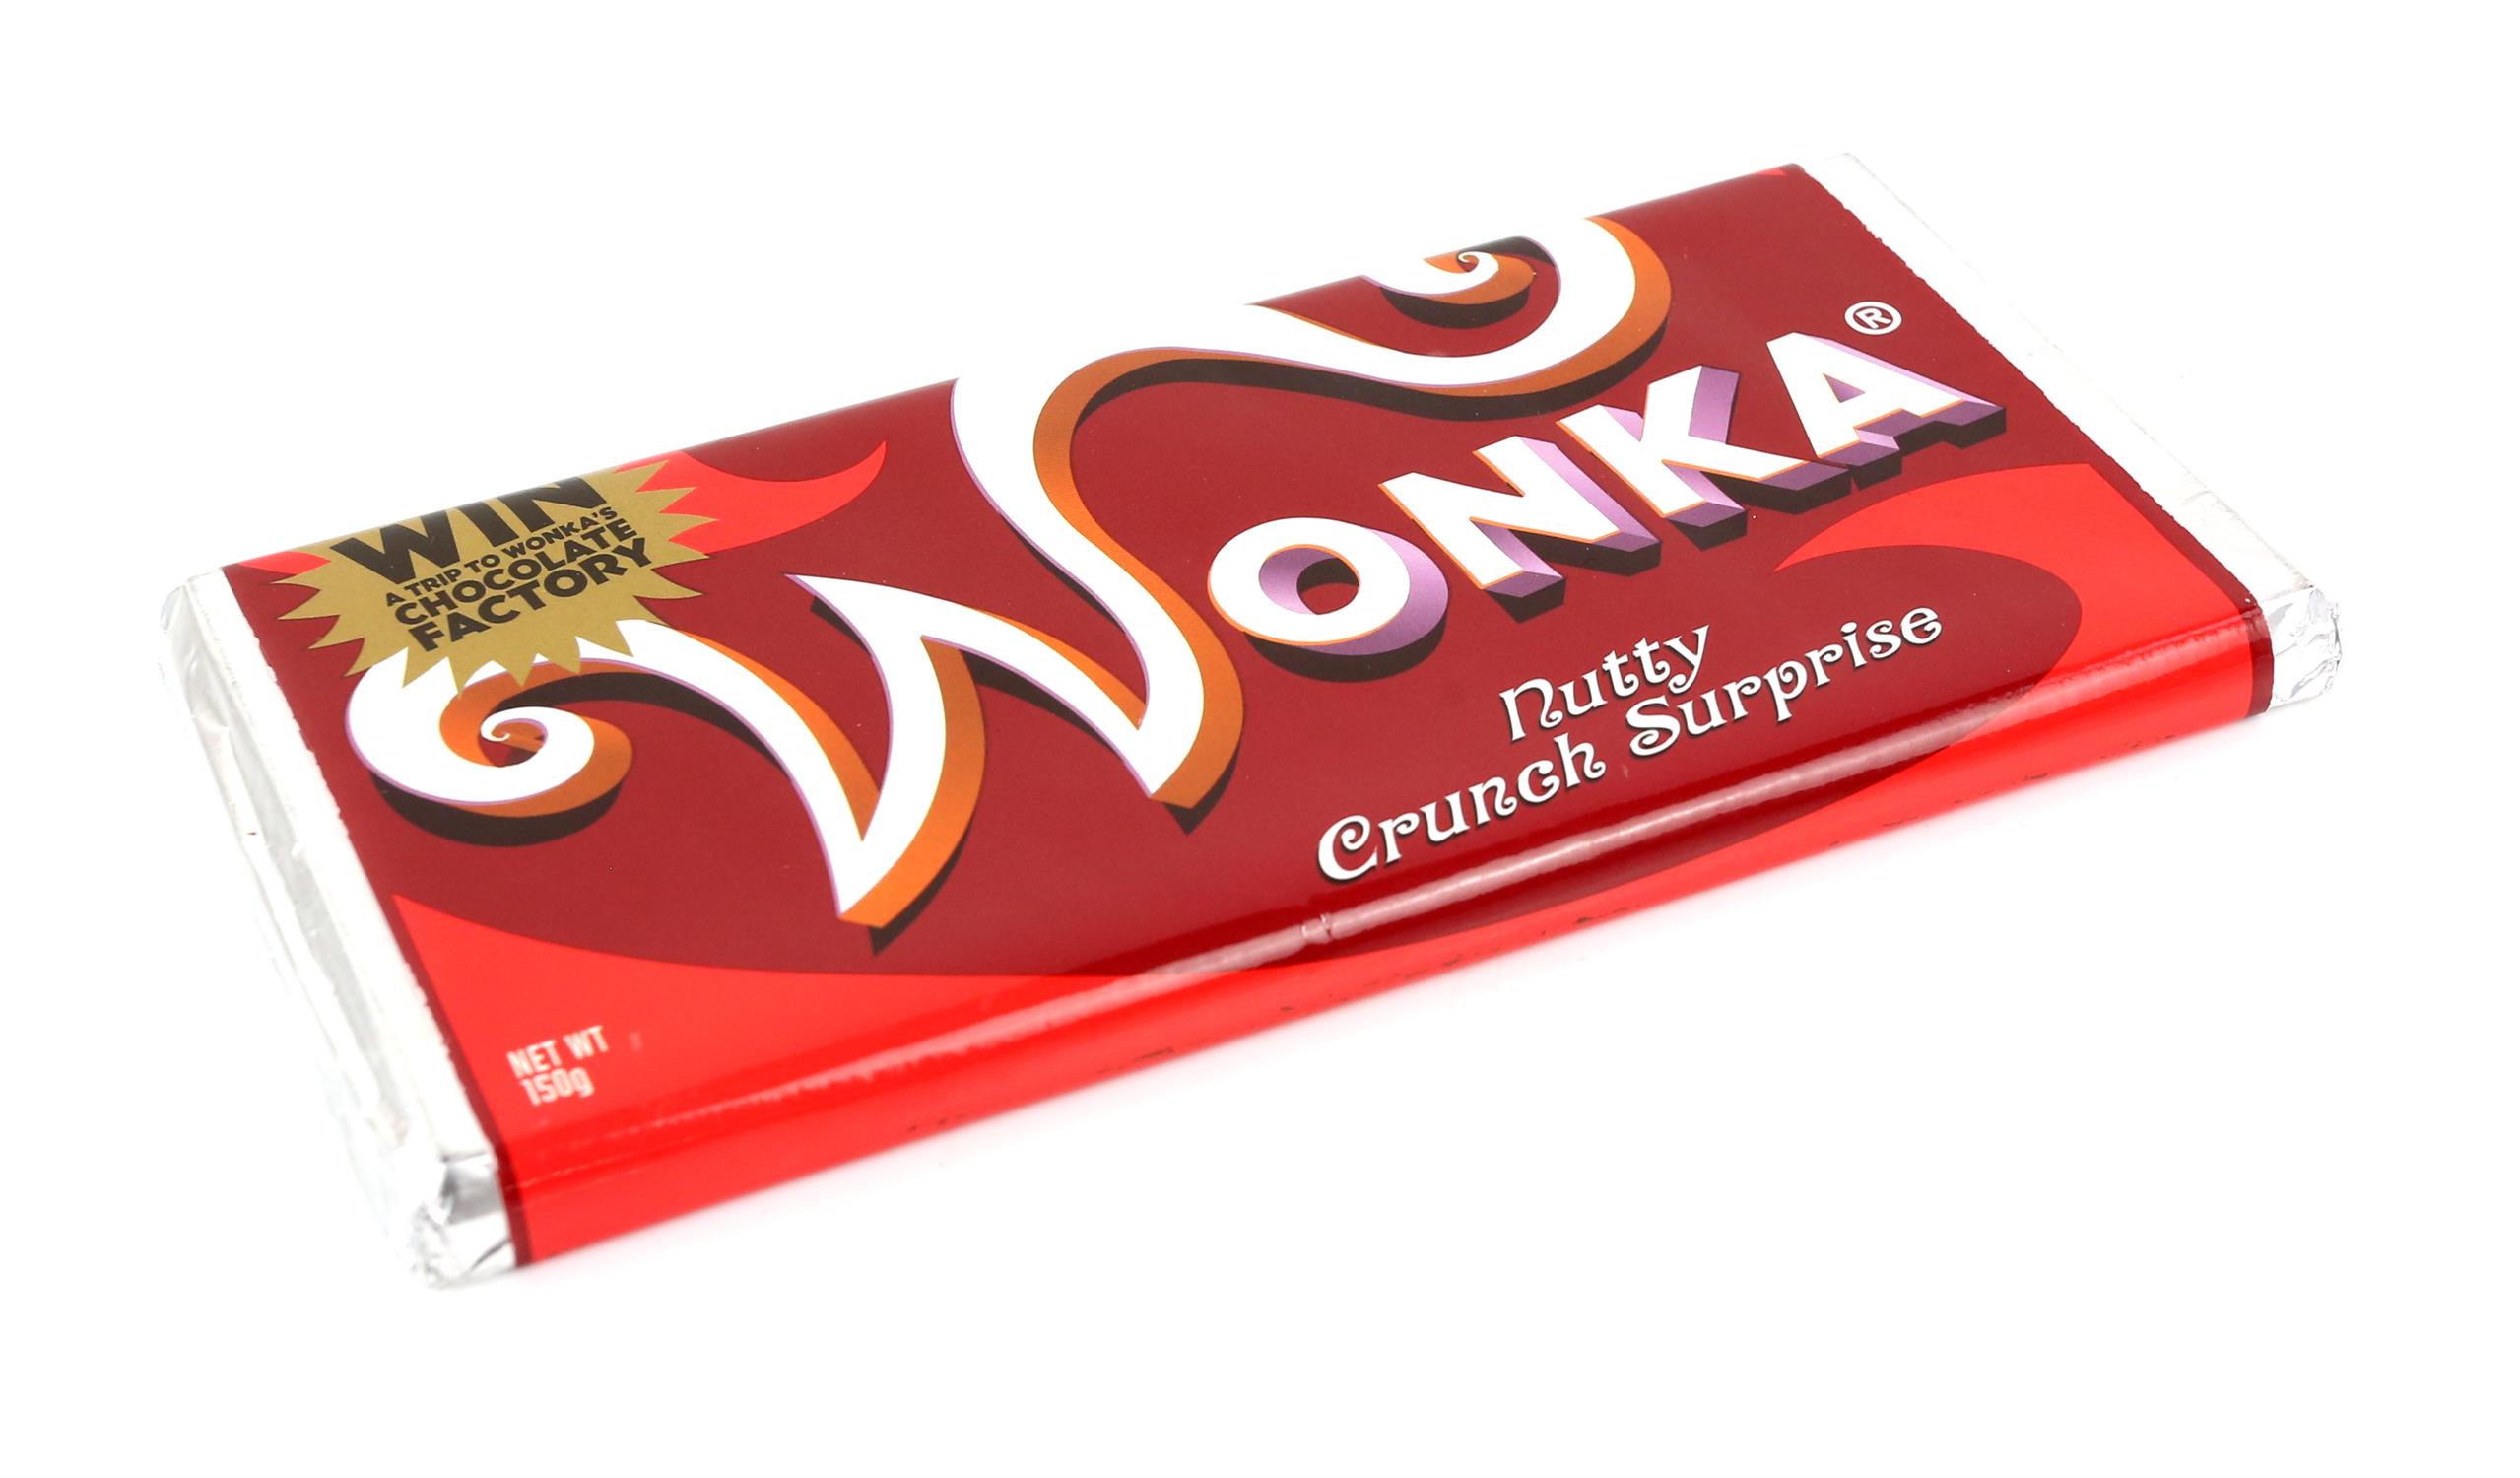 Charlie & The Chocolate Factory (2005) ‘Triple Dazzle Caramel' original Wonka Bar used in the